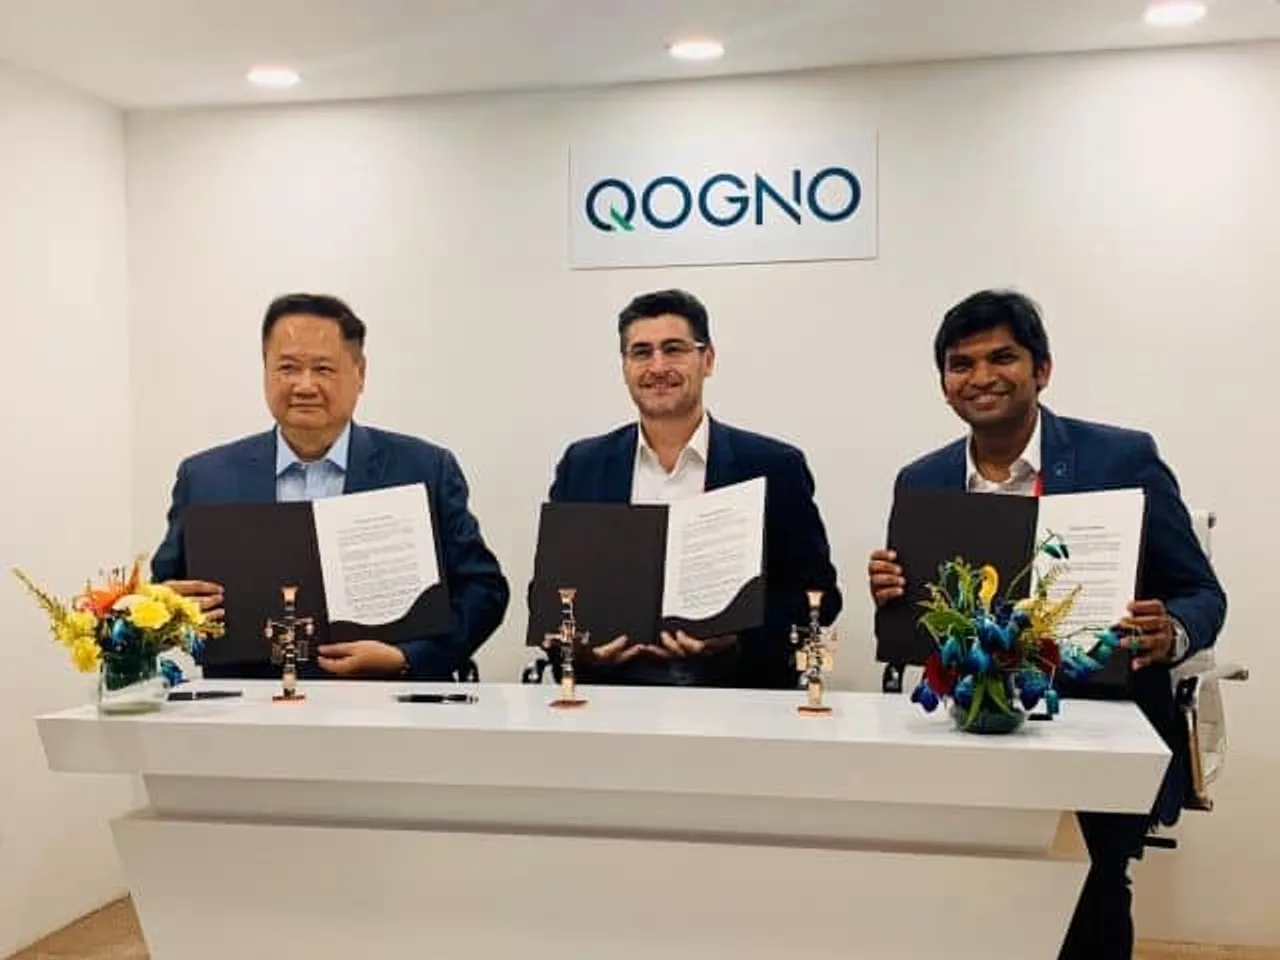 Qogno TenX2 develop 5G solutions for India